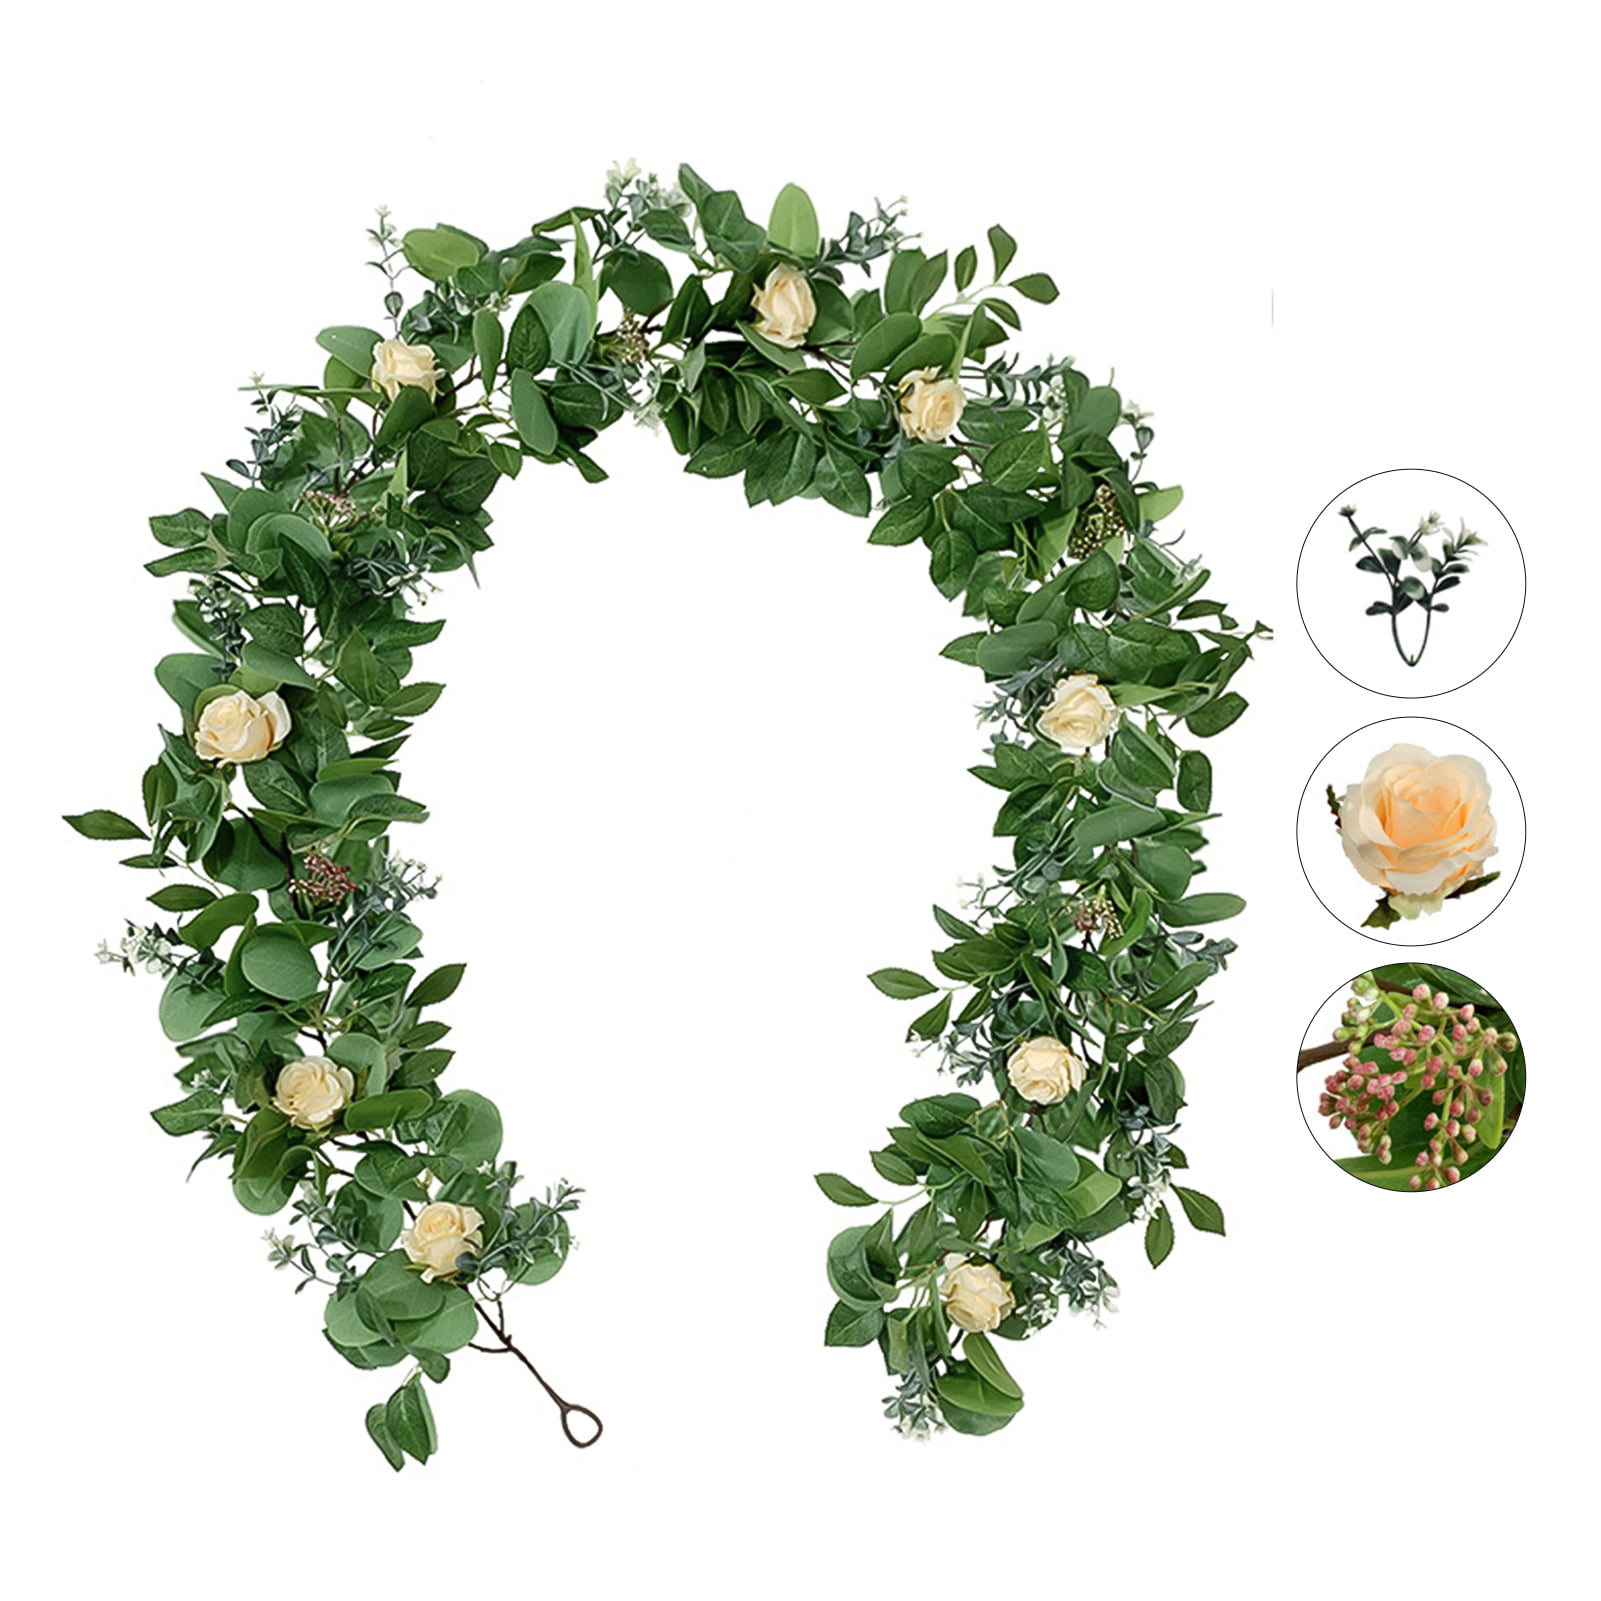 Details about   Artificial Rose Garland Leaves Wreath Rattan Wall Front Door Home Party Decor 